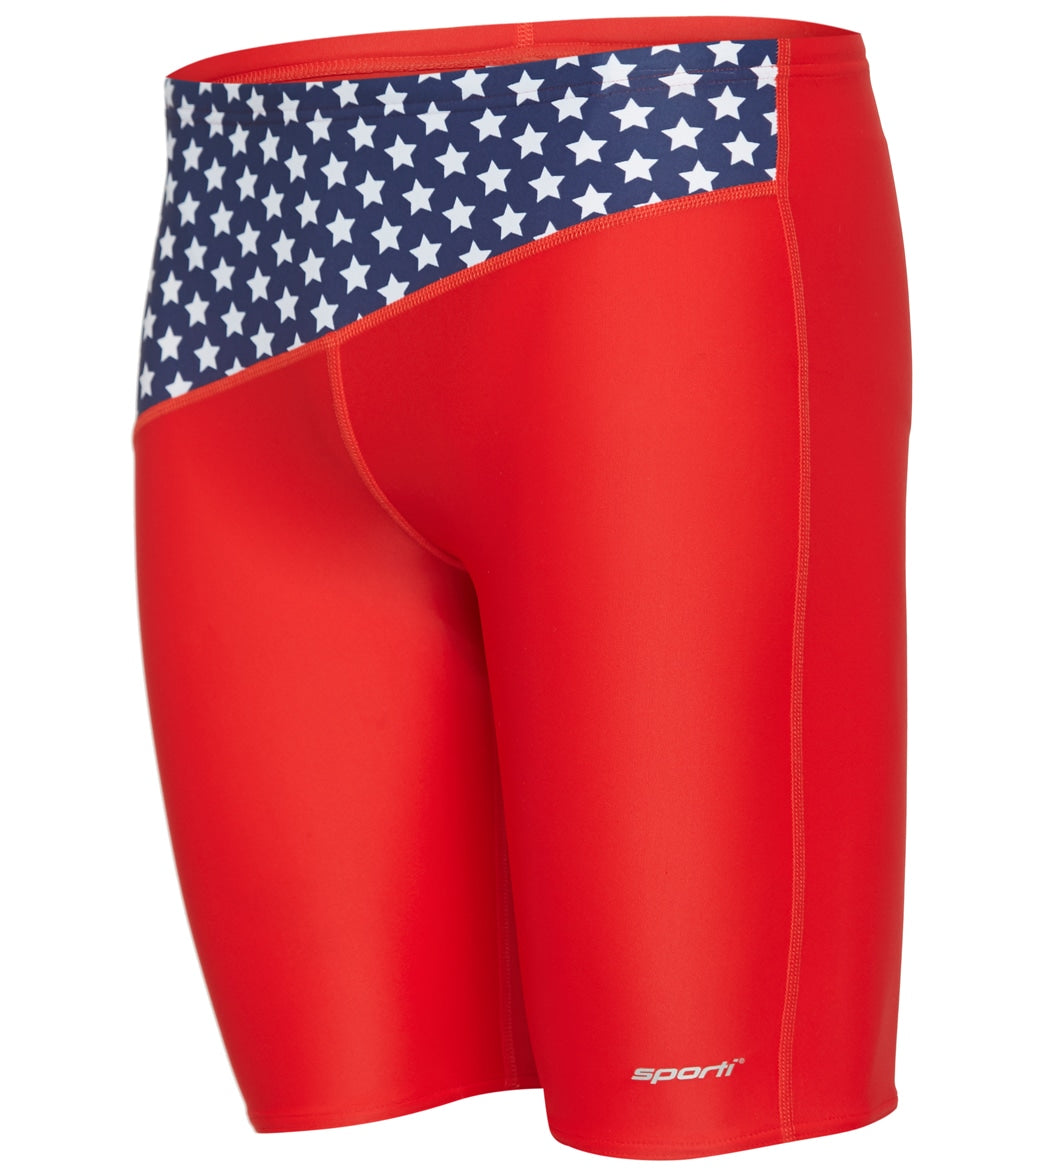 Sporti Star Spangled Jammer Swimsuit - Red/White/Blue 26 - Swimoutlet.com